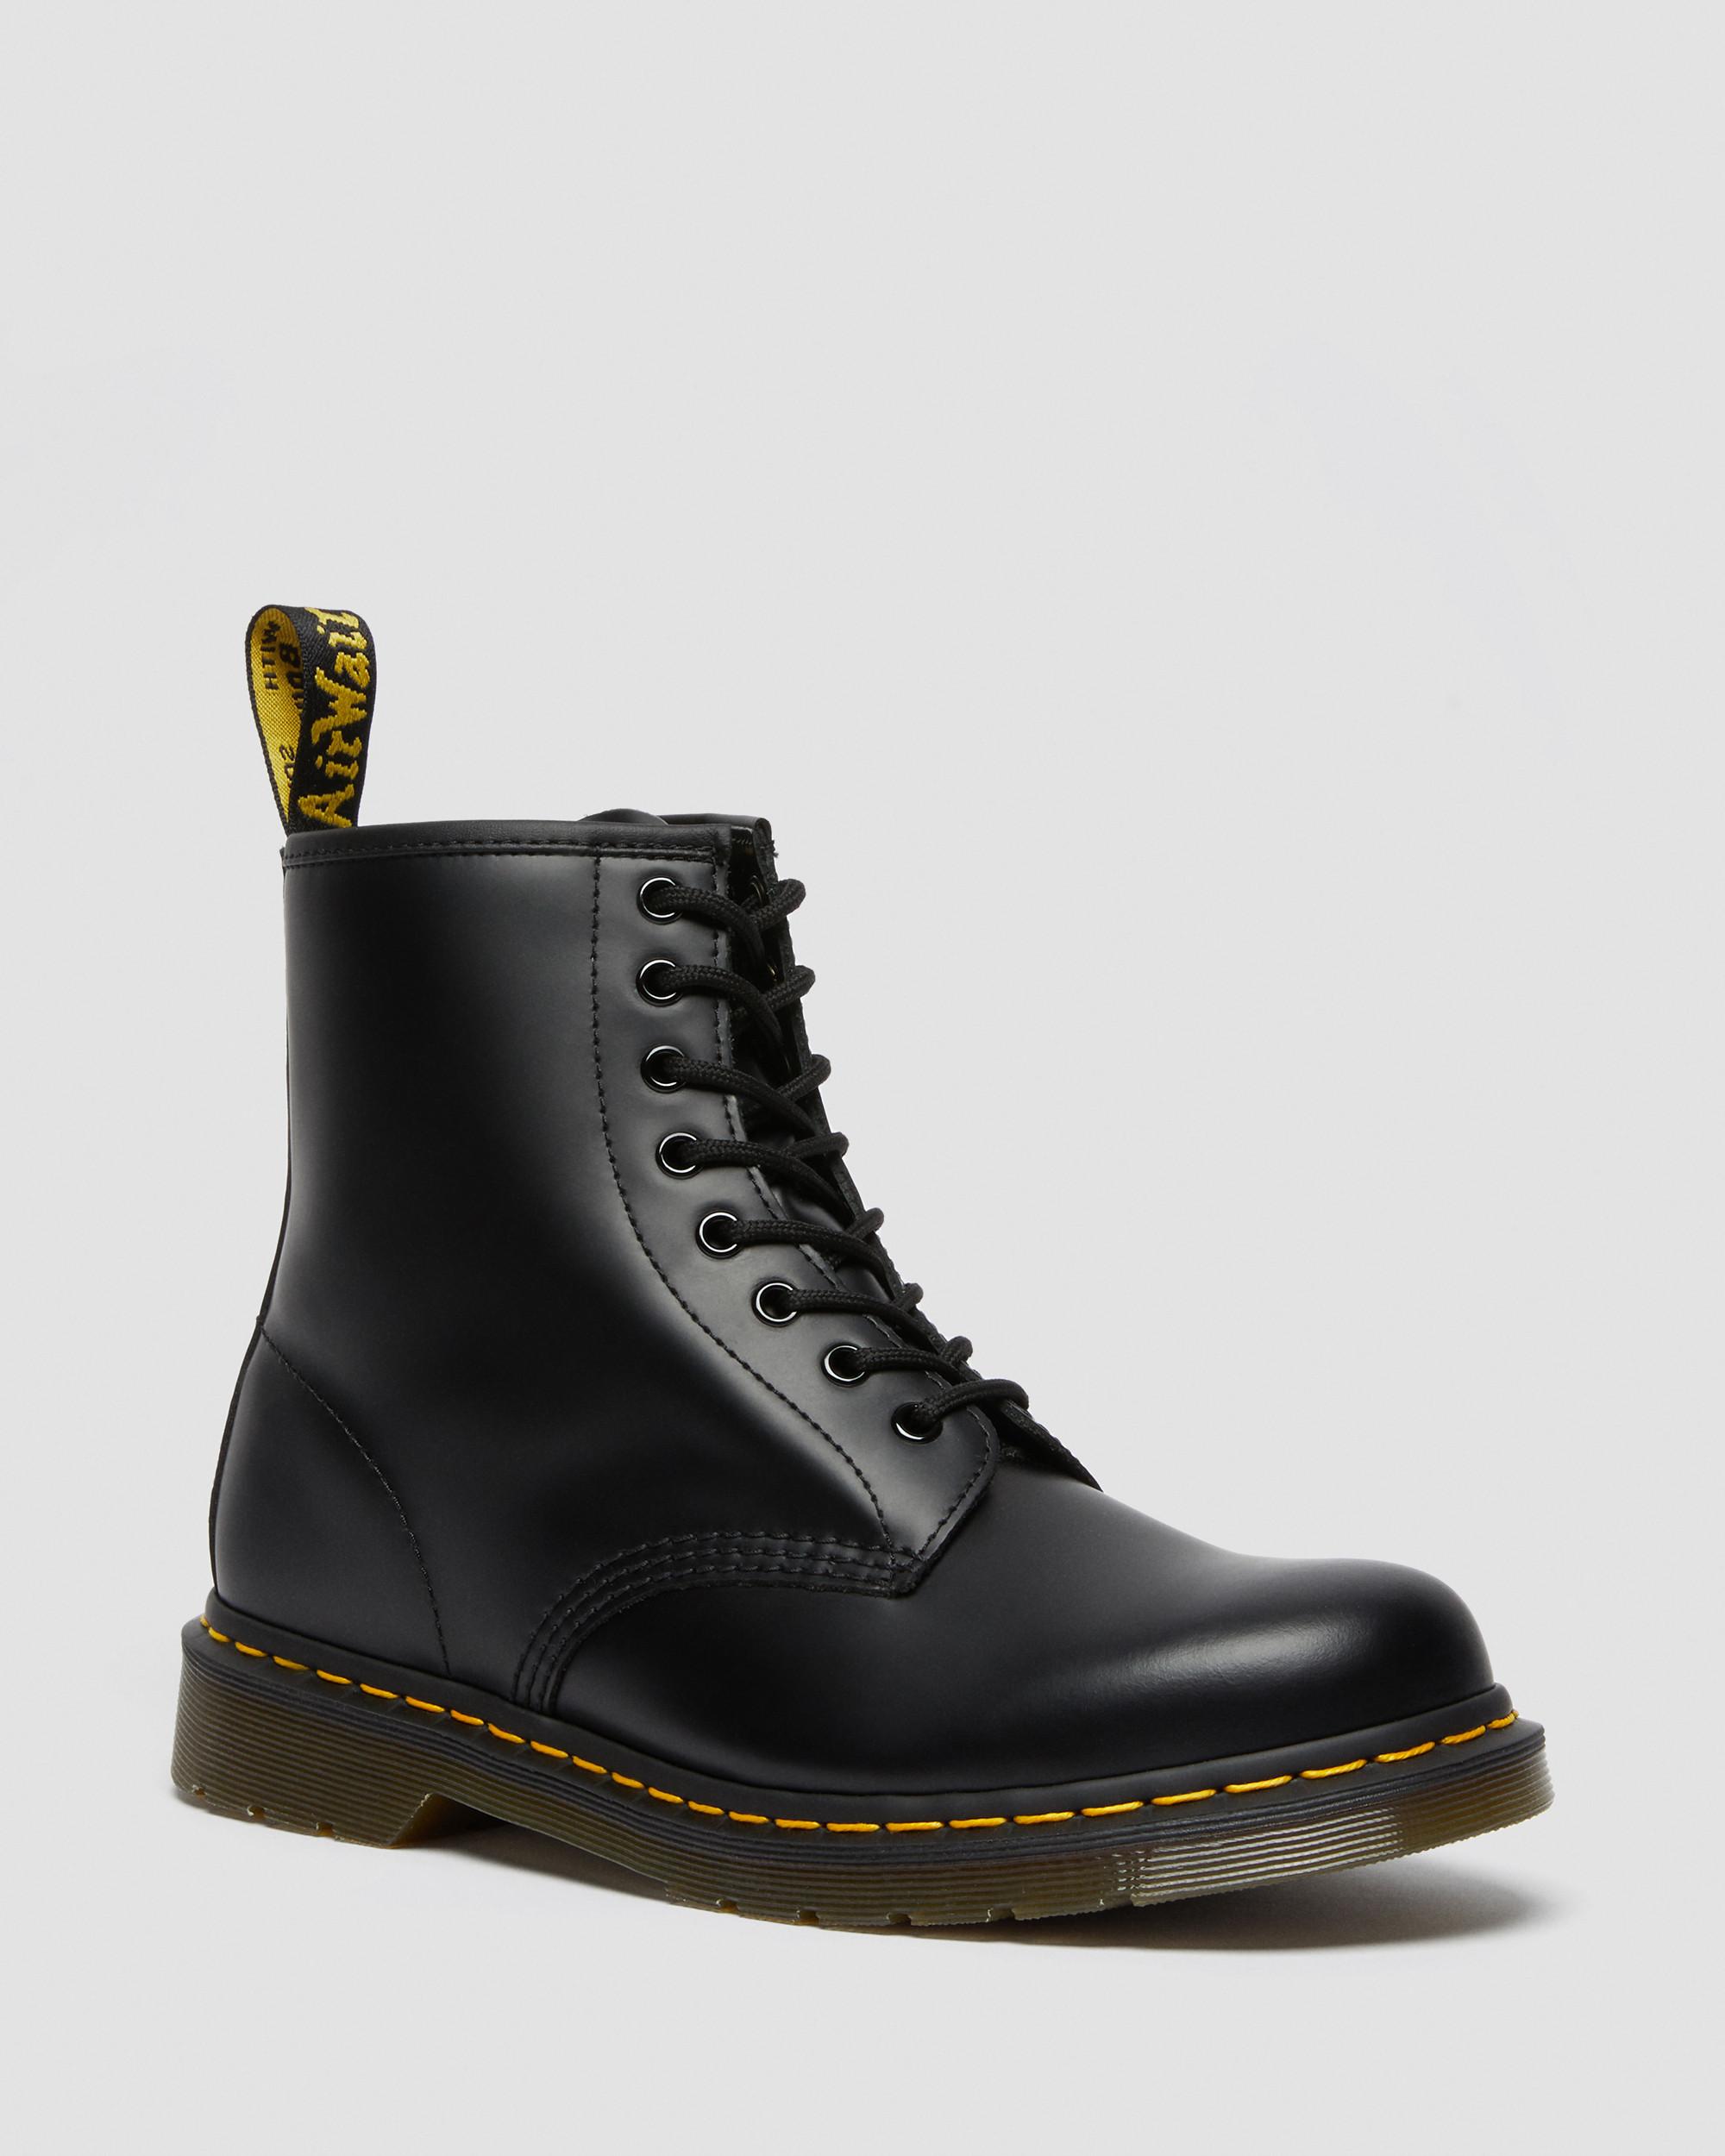 Buskruit Gematigd Snel 1460 Smooth Leather Lace Up Boots | Dr. Martens